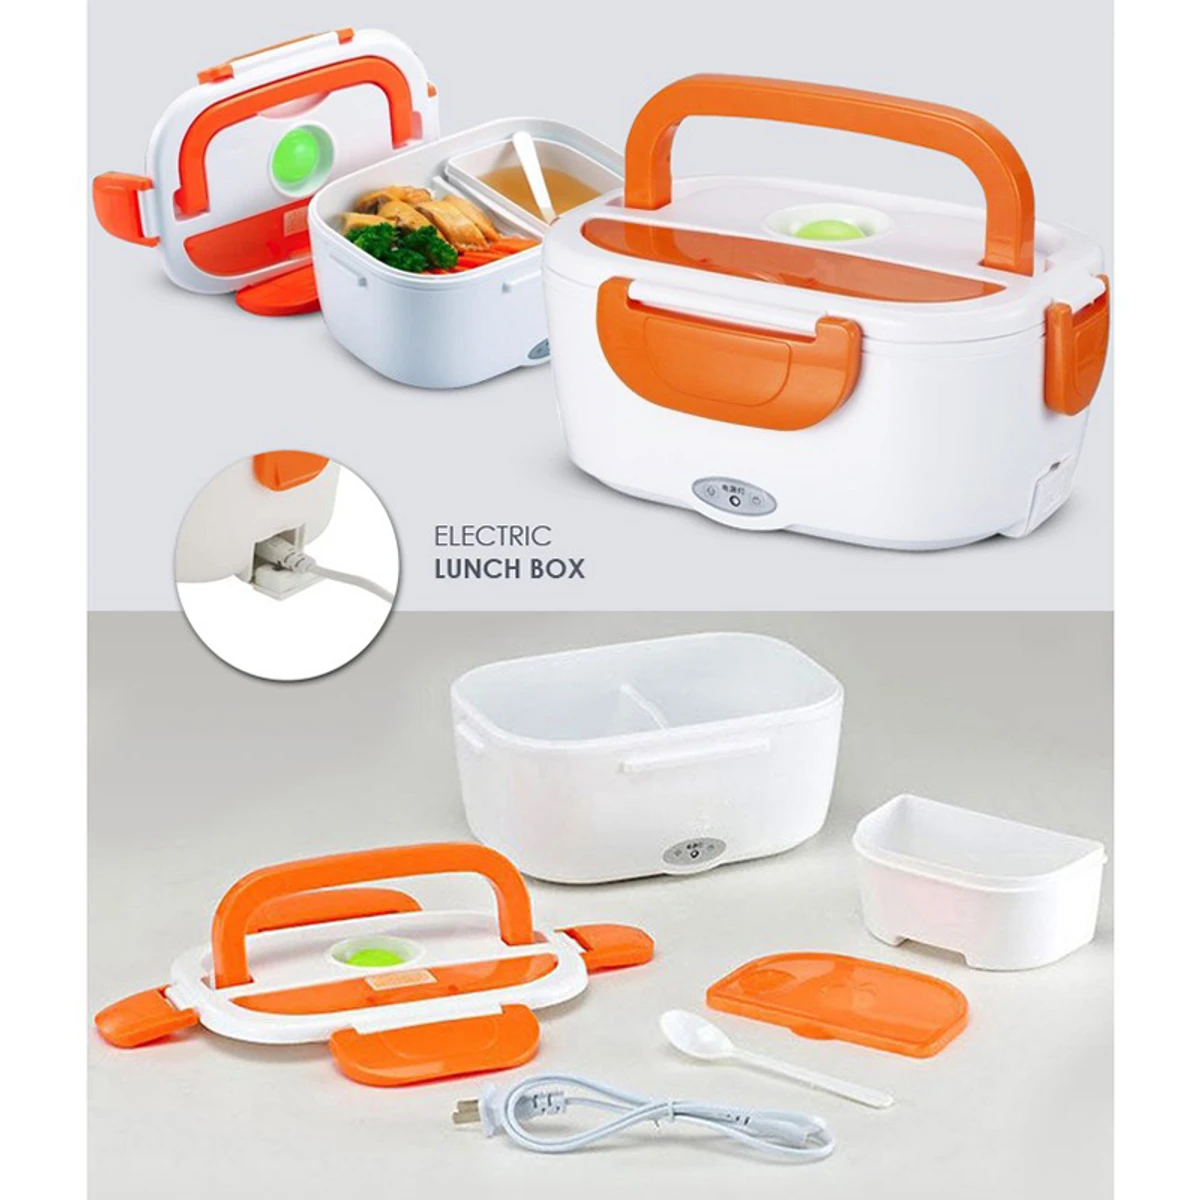 Electrical lunch box, Electric lunch box, office lunch box, food box, electric tiffin box